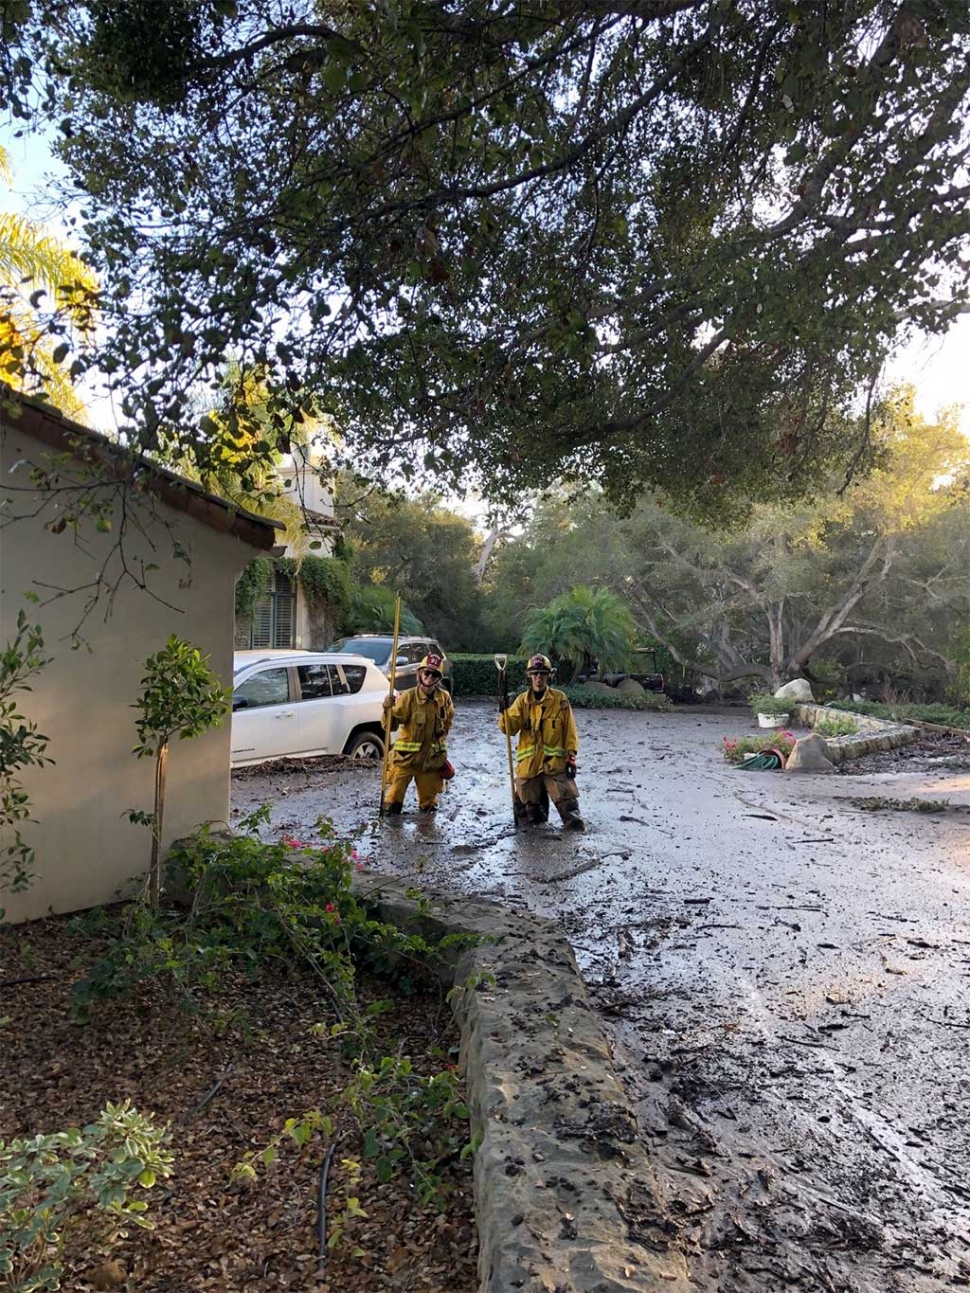 After the deadly mudslide in Montecito occurred last Tuesday morning, Fillmore’s Engine 91 was requested to be part of a mix strike team along with Federal Fire, Ventura City Fire, Oxnard Fire, and Santa Paula Fire. Fillmore Fire Fighters Claire Morgan and Jordan Castro (pictured above) were up to their thighs in mud outside a home in the Montecito area.